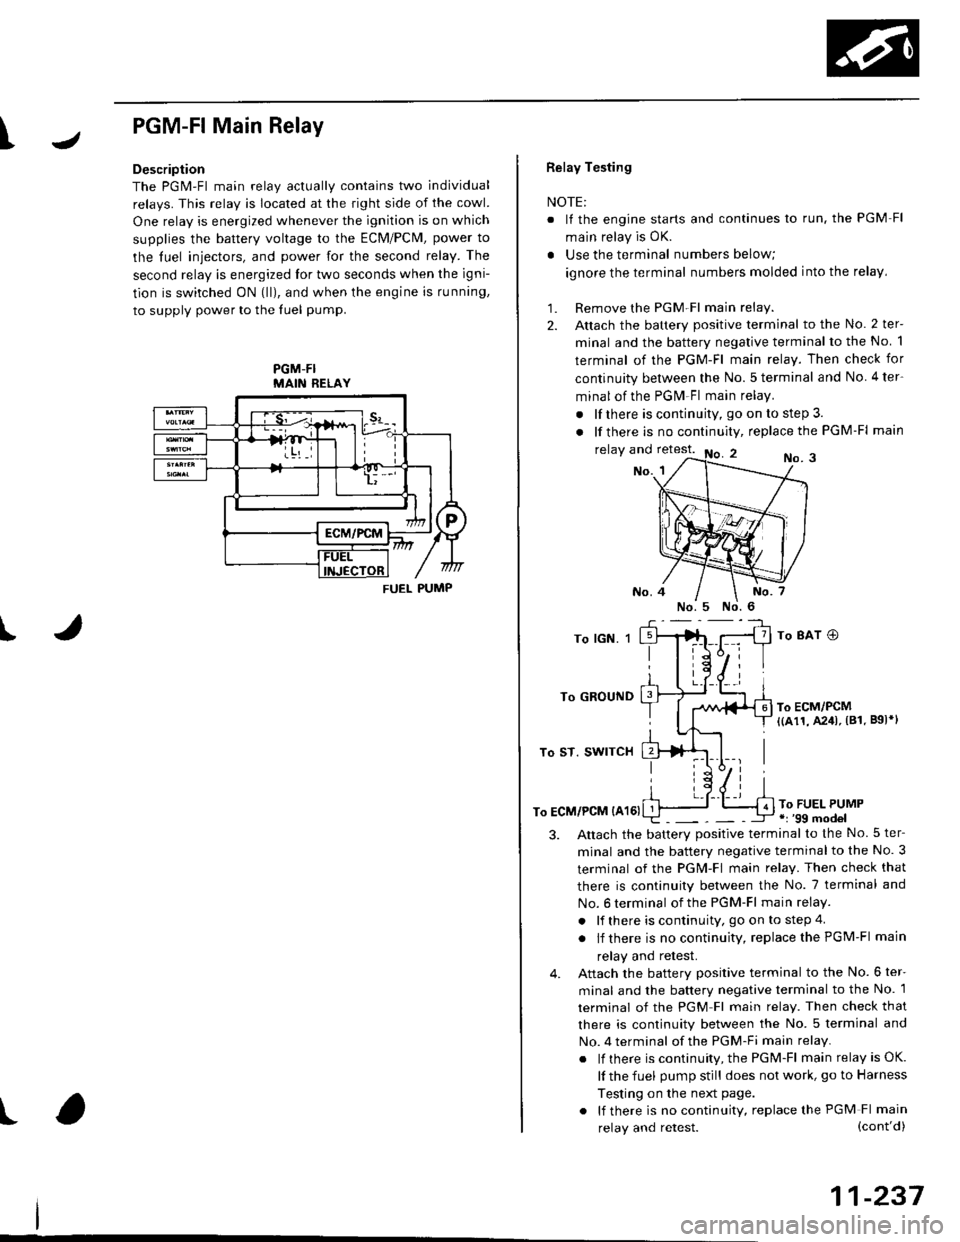 HONDA CIVIC 1997 6.G Workshop Manual I
PGM-FlMain Relay
Description
The PGM-Fl main relav actuallv contains two individual
relays. This relay is located at the right side of the cowl.
One relay is energized whenever the ignition is on wh